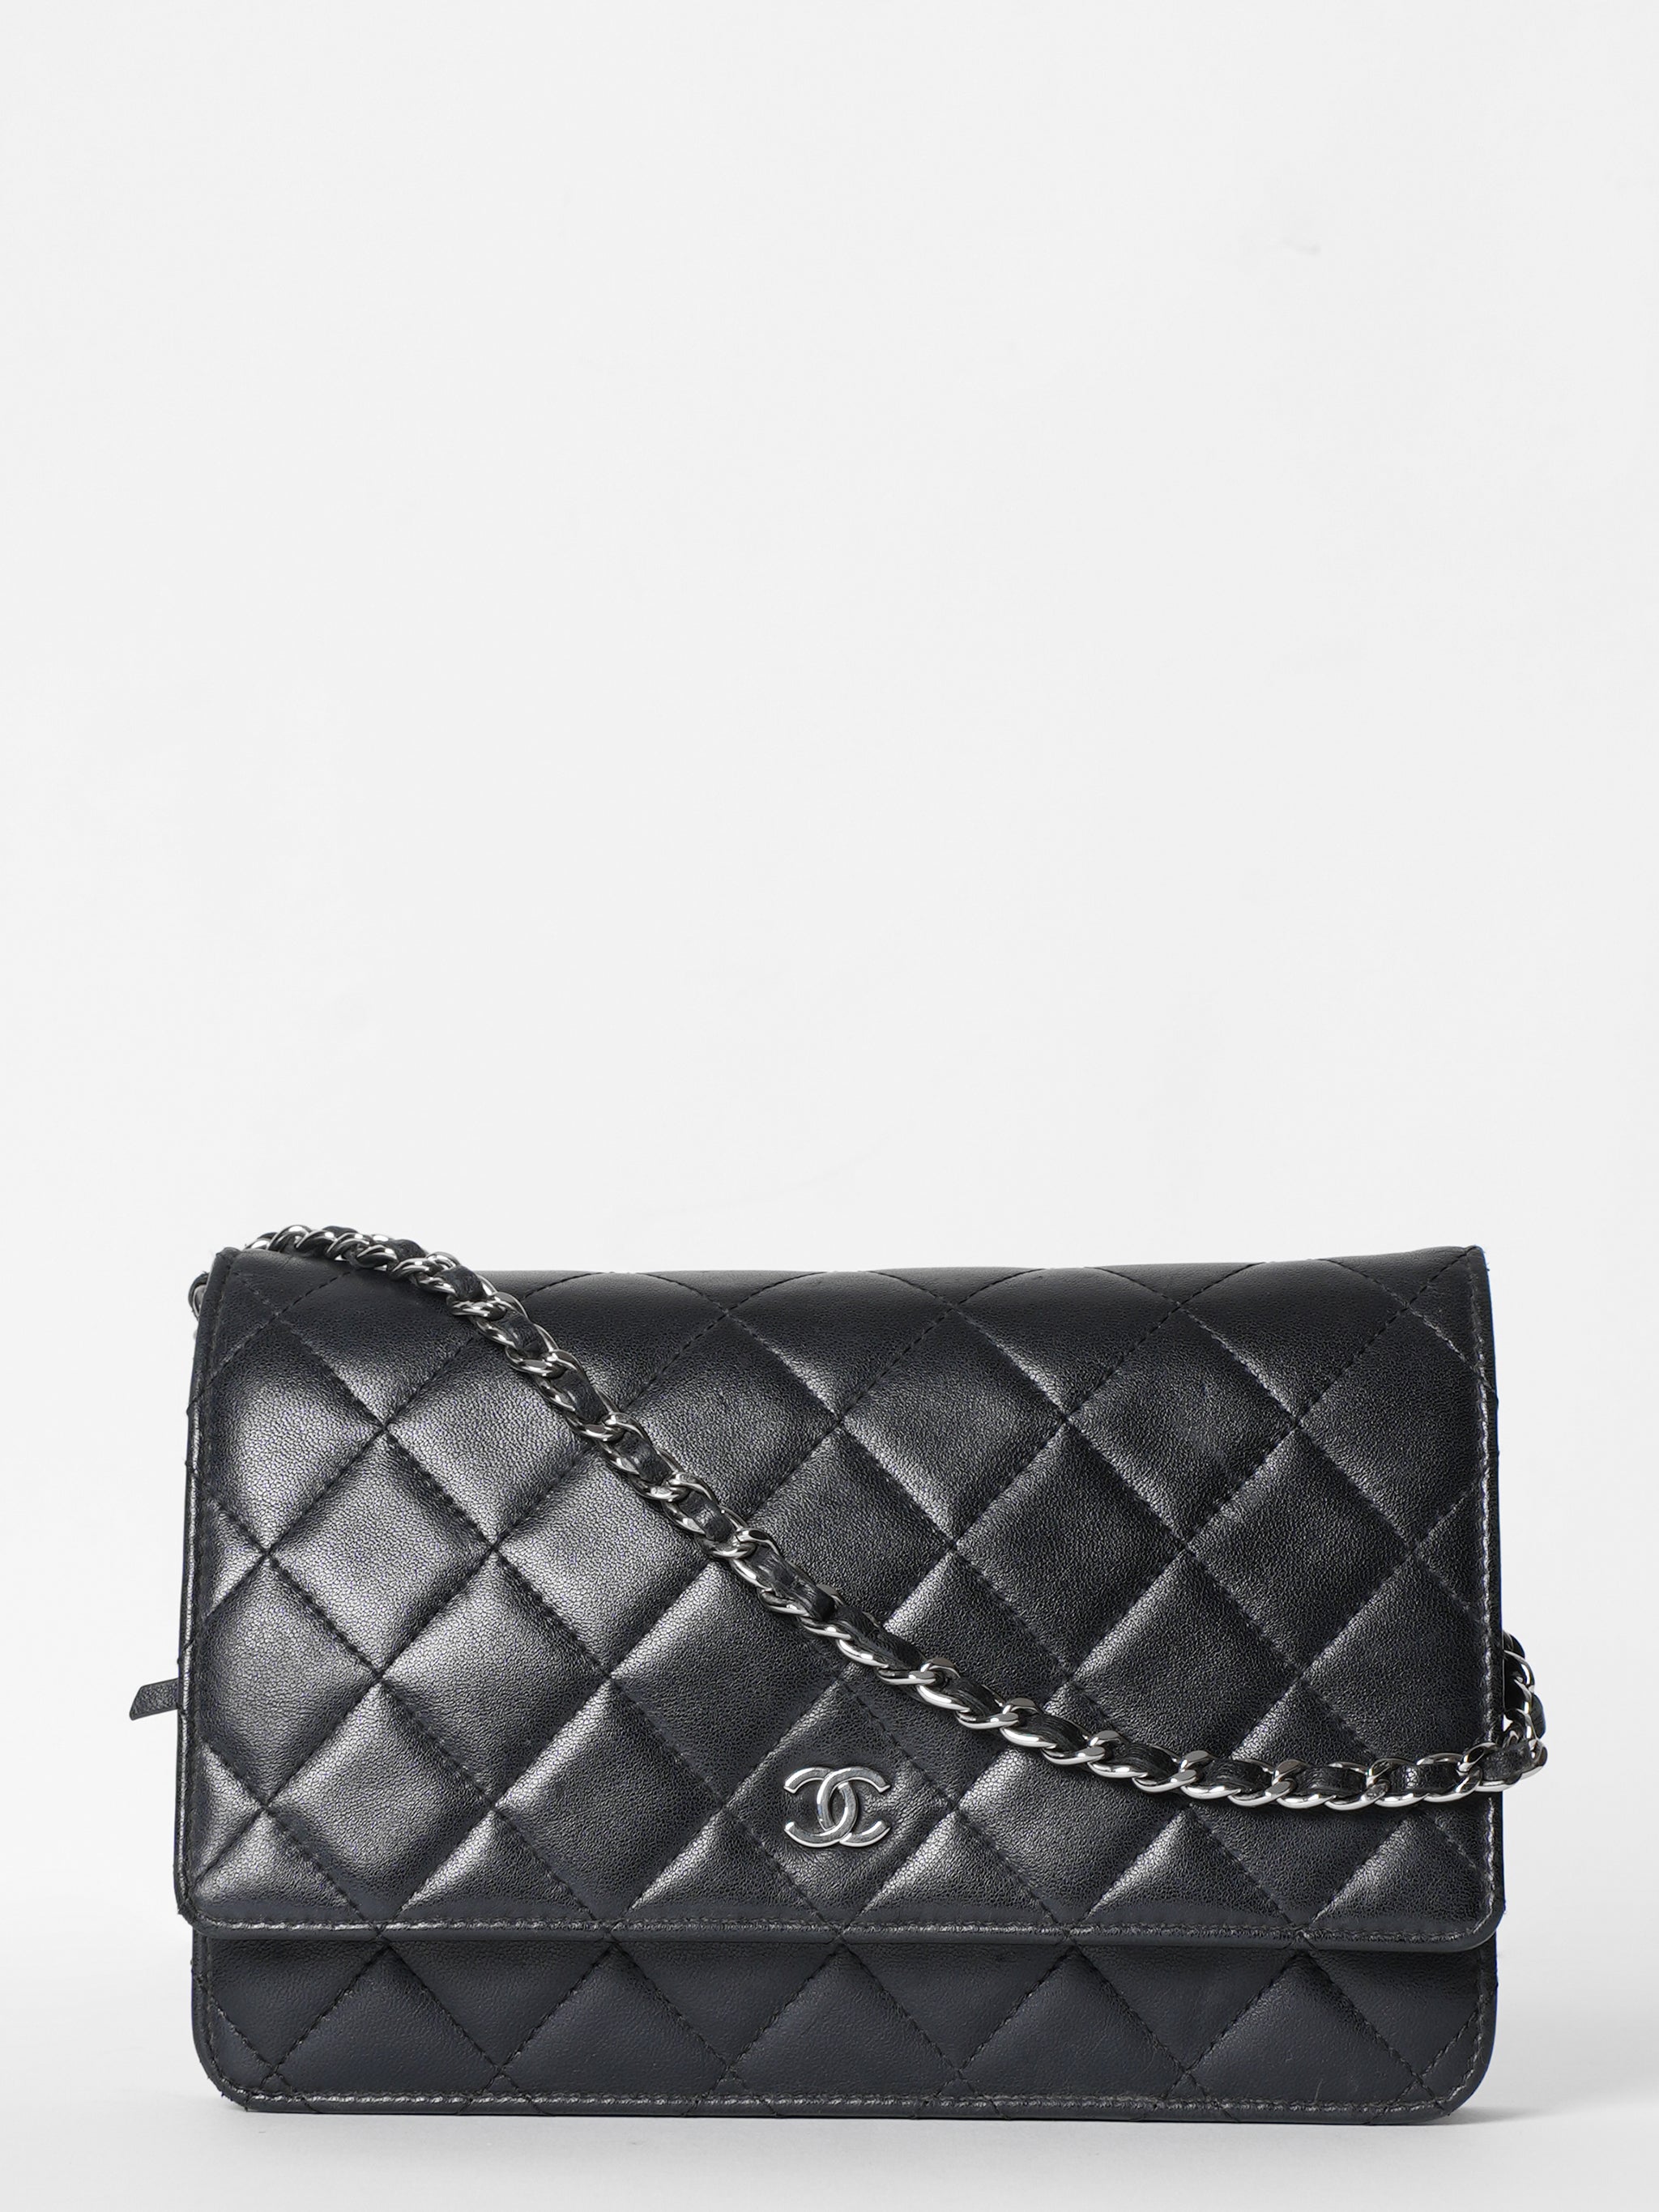 Chanel Black Quilted Caviar Bag